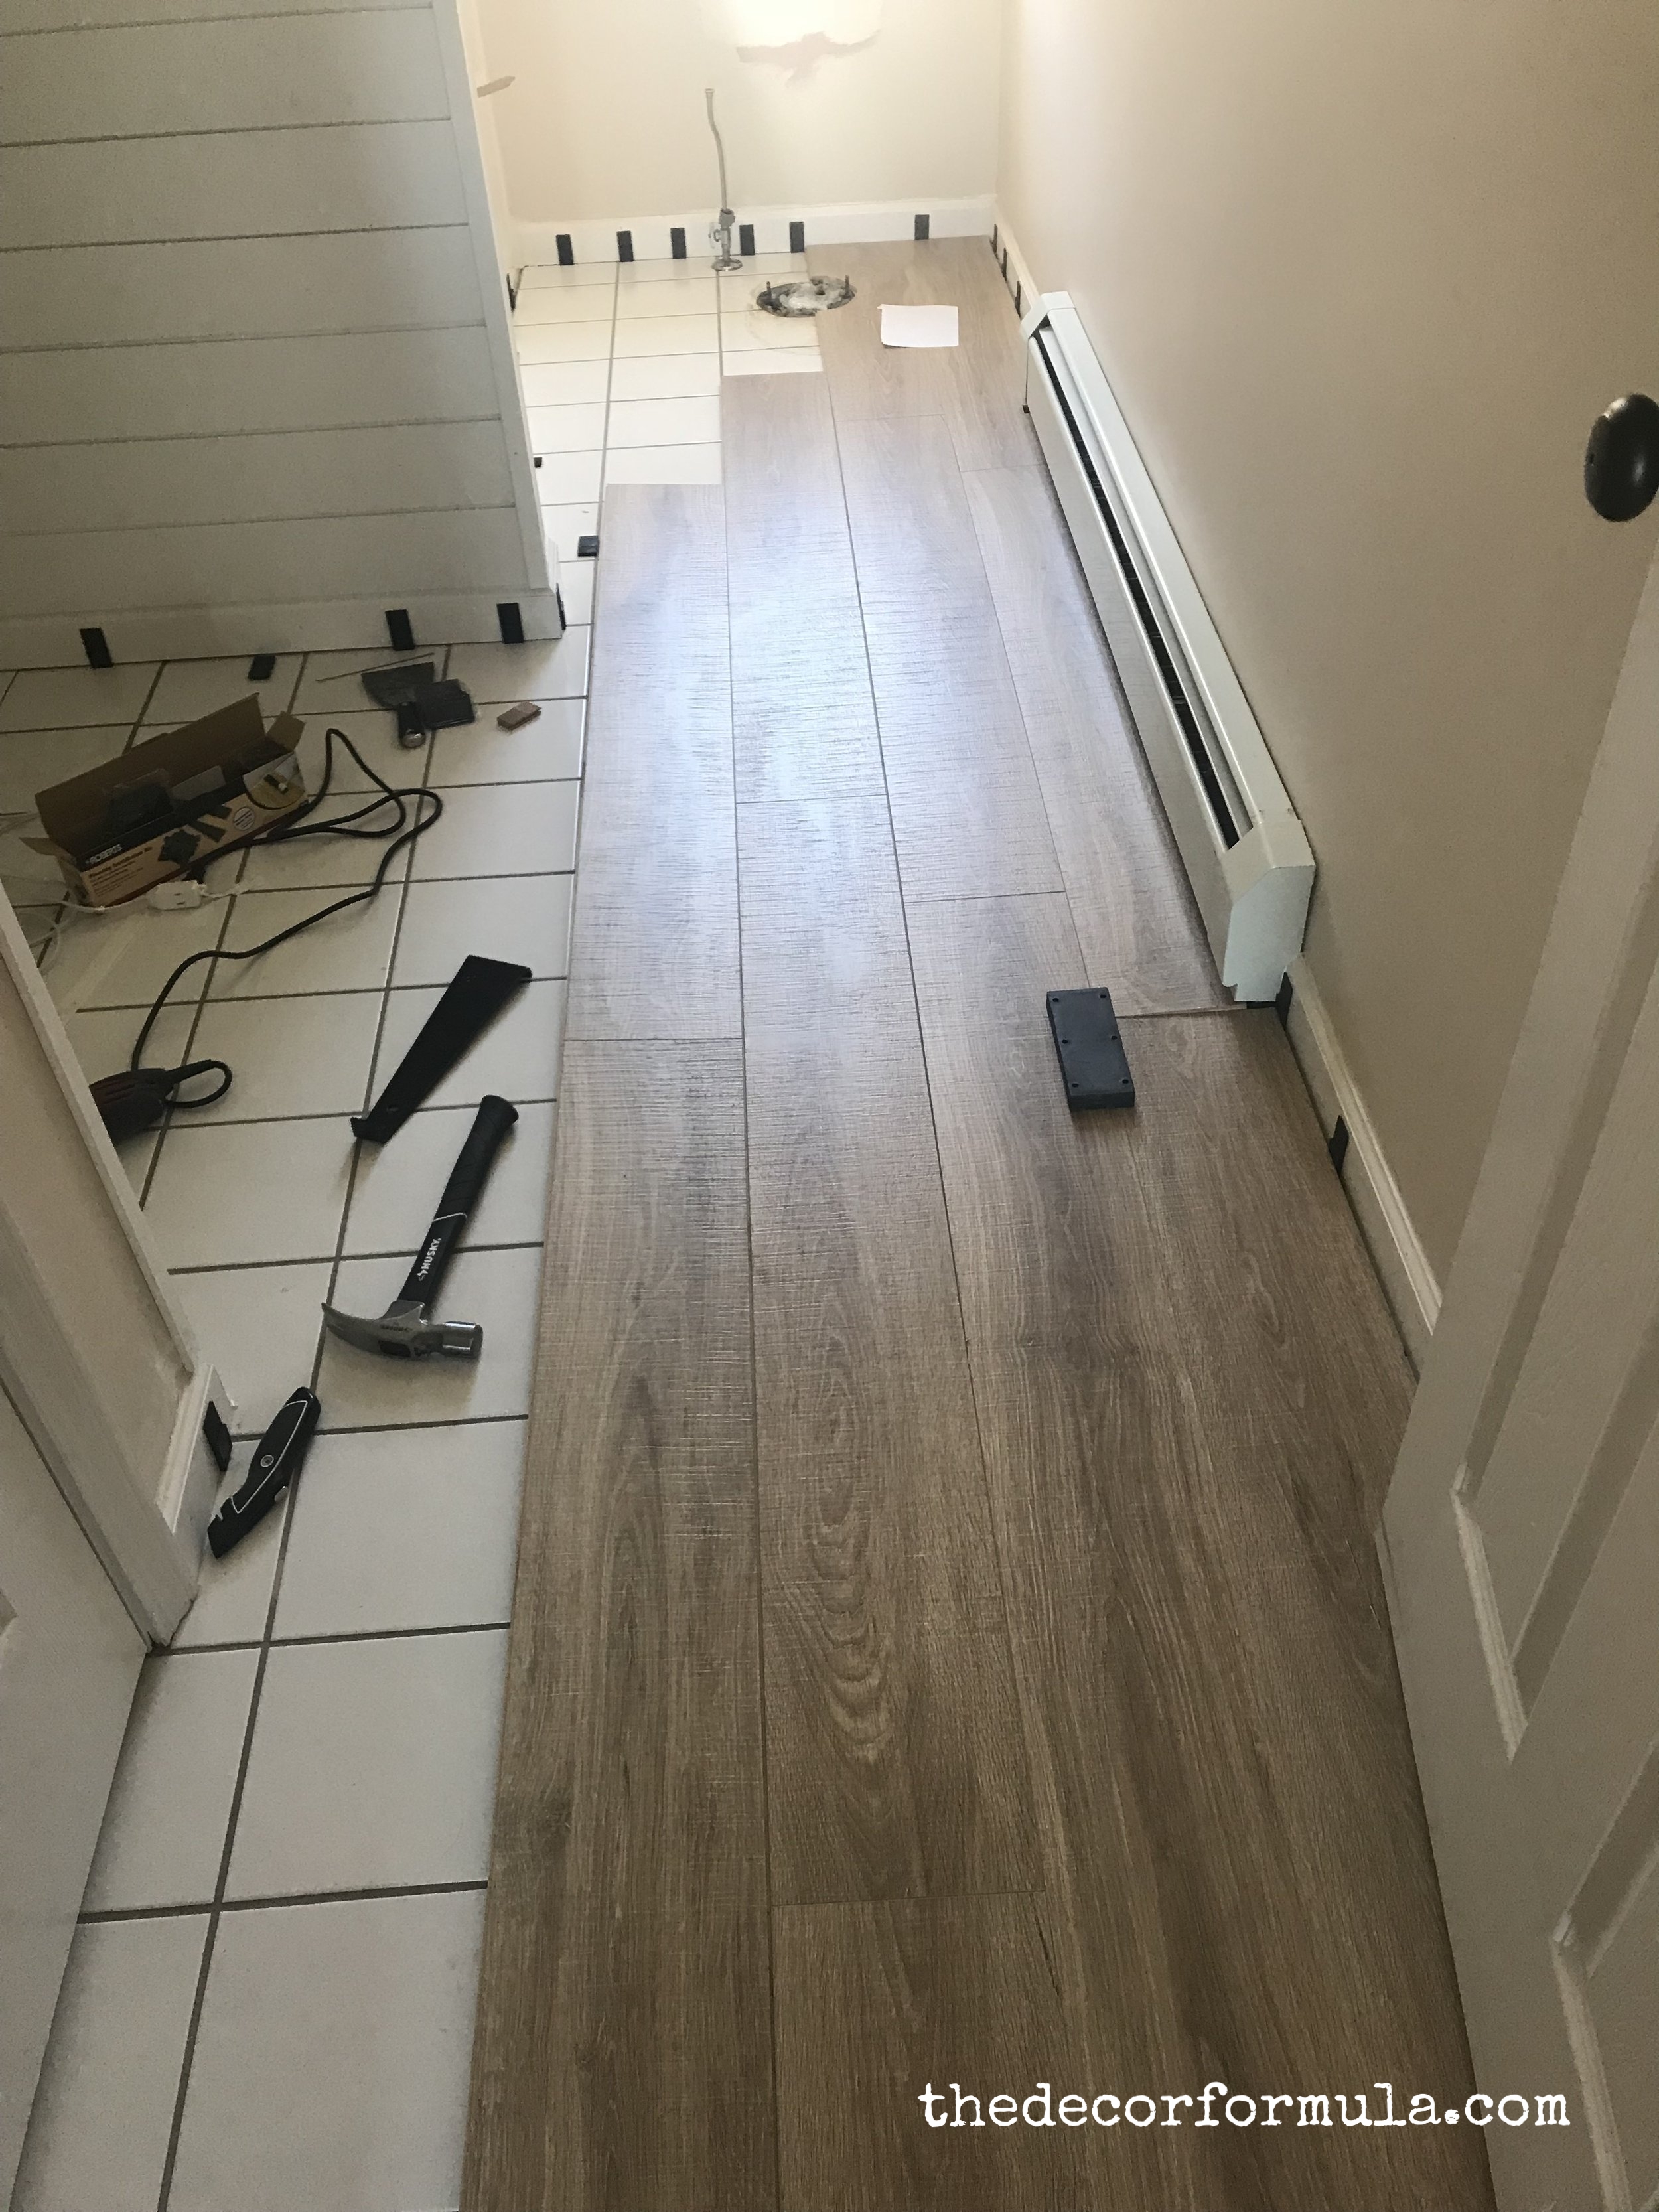 Ideas For Covering Up Tile Floors Without Removing It The Decor Formula - Can You Put Laminate Flooring Over Tile In The Bathroom